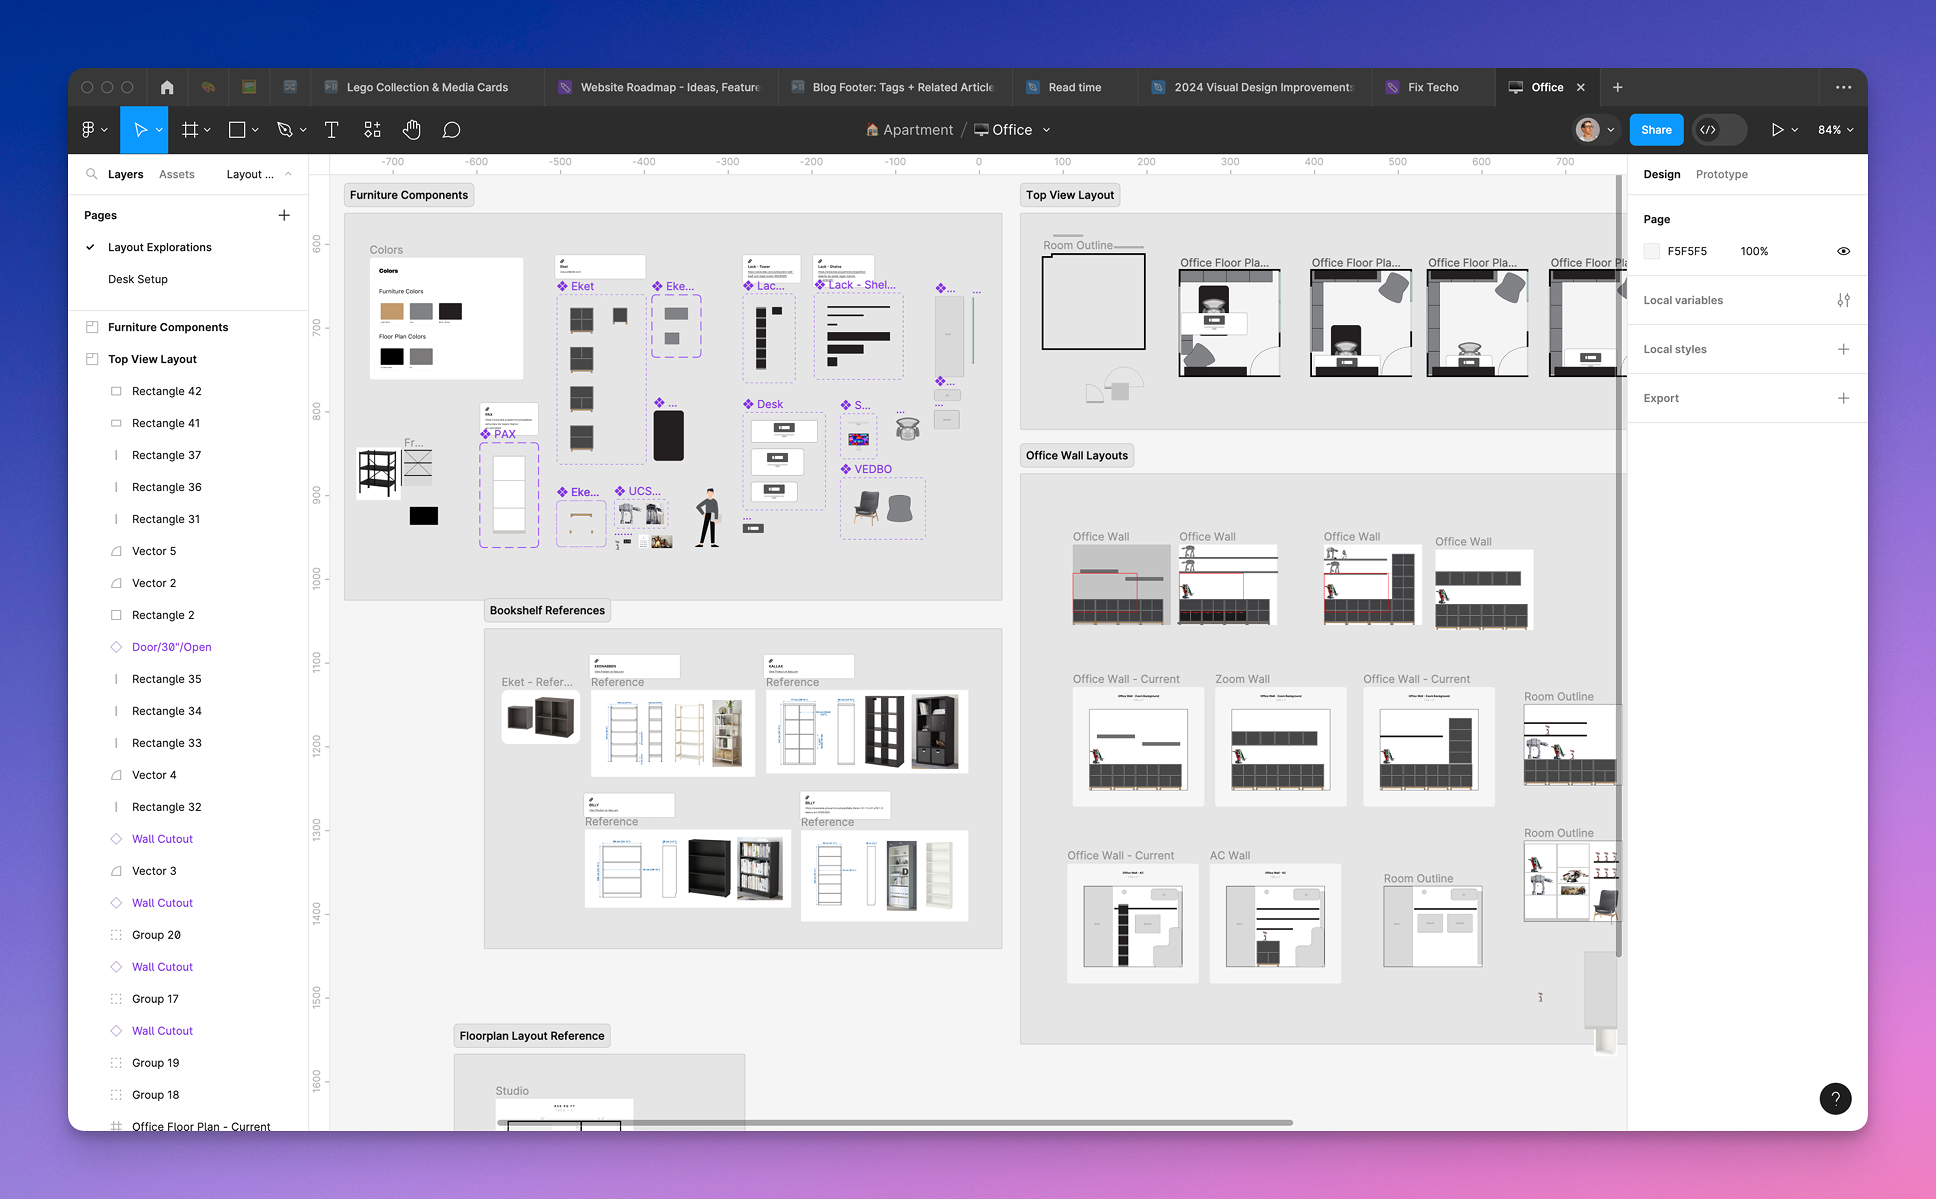 A screenshot of a design software interface in Figma with various workspace layouts, furniture components, and bookshelf references, indicating a project for organising or planning an office space